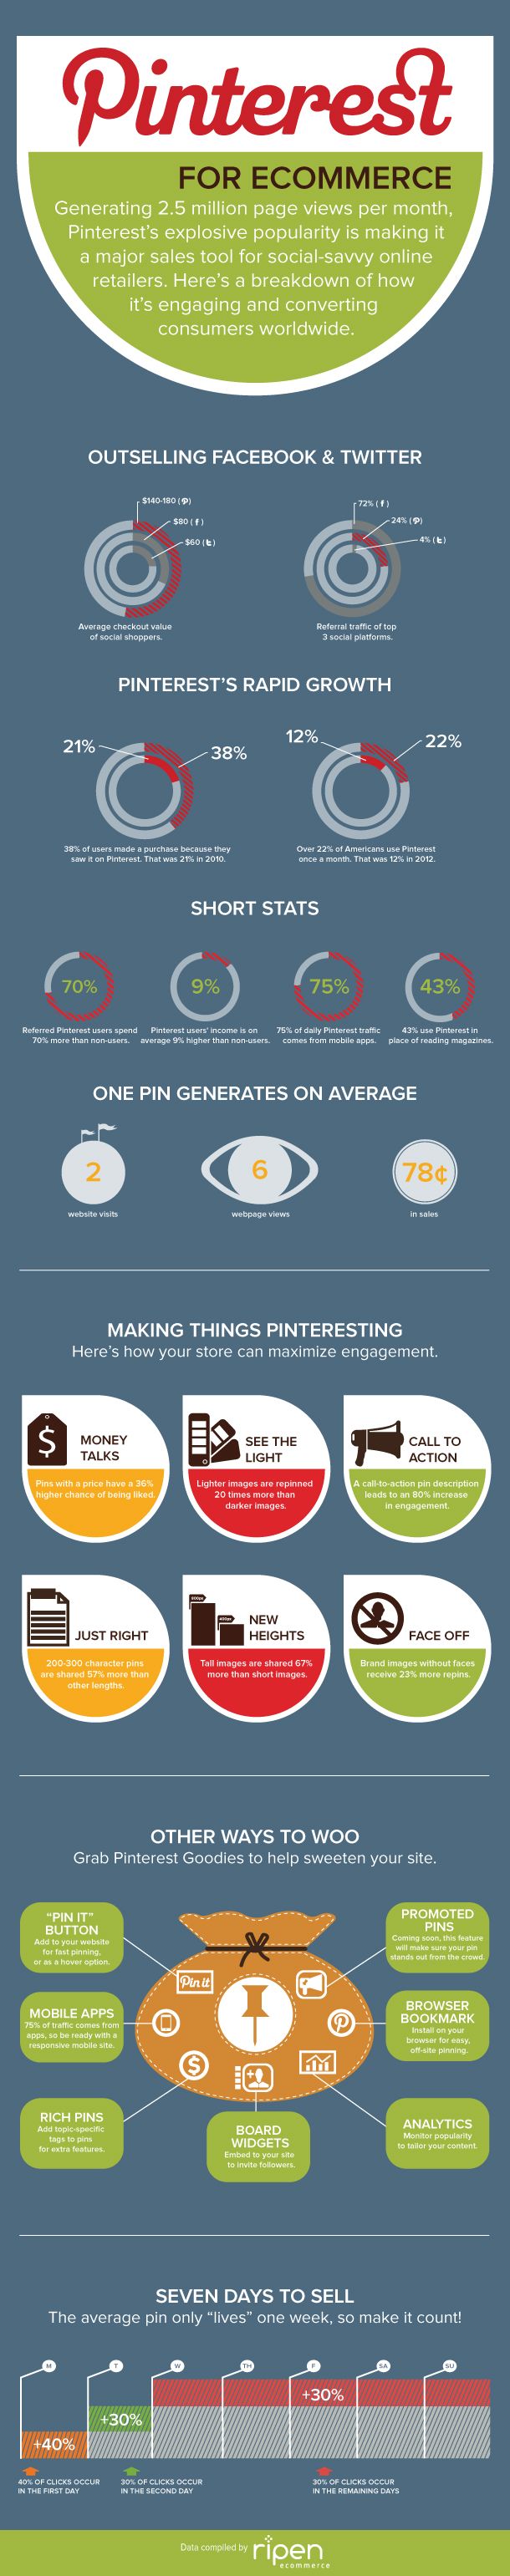 Adding-Pinterest-to-Your-eCommerce-Strategy-infographic